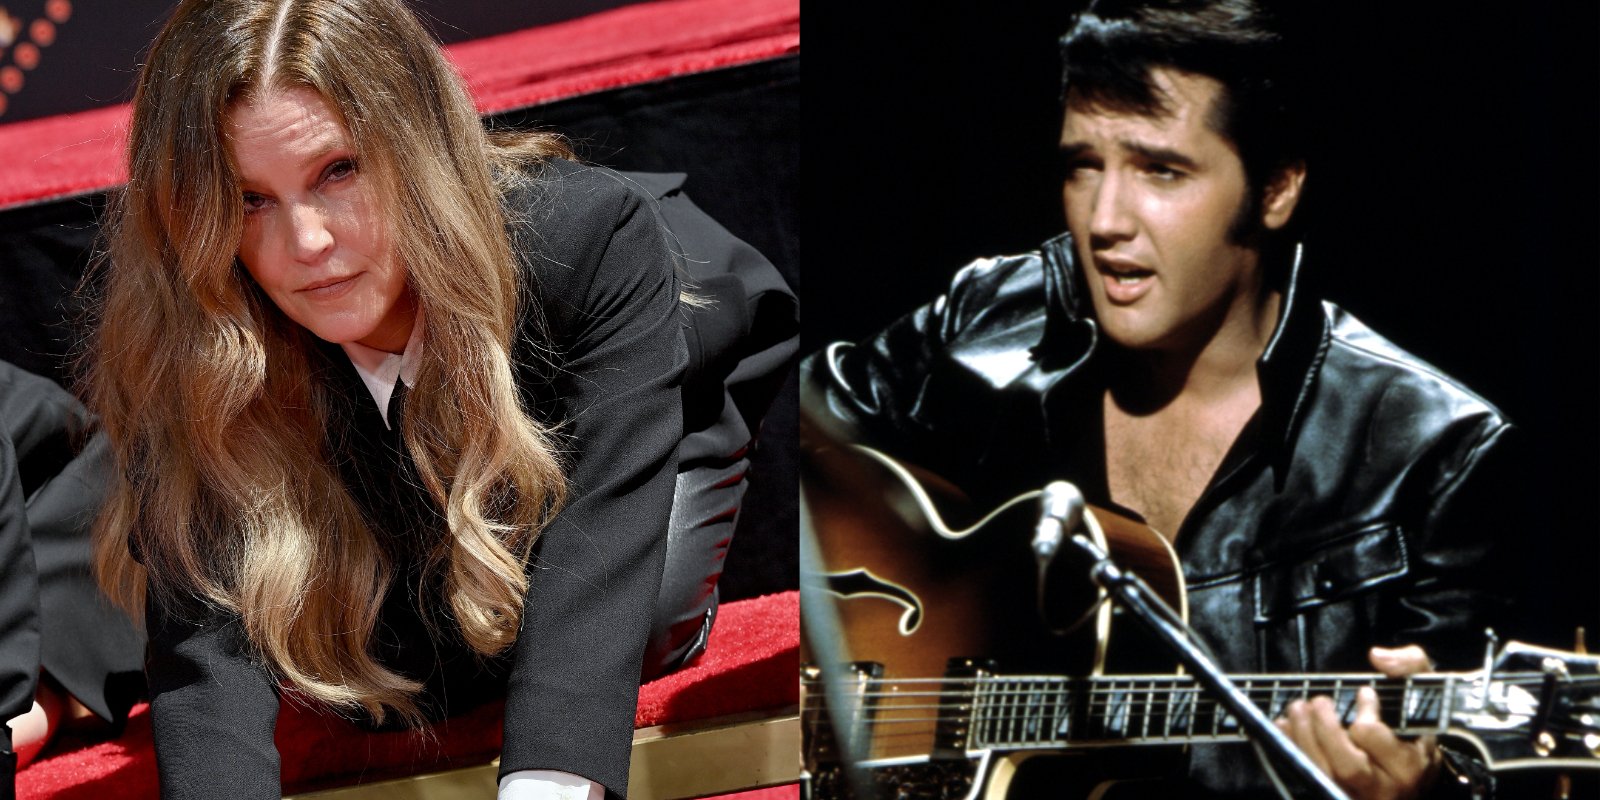 Lisa Marie Presley and Elvis Presley in a set of side by side photographs.